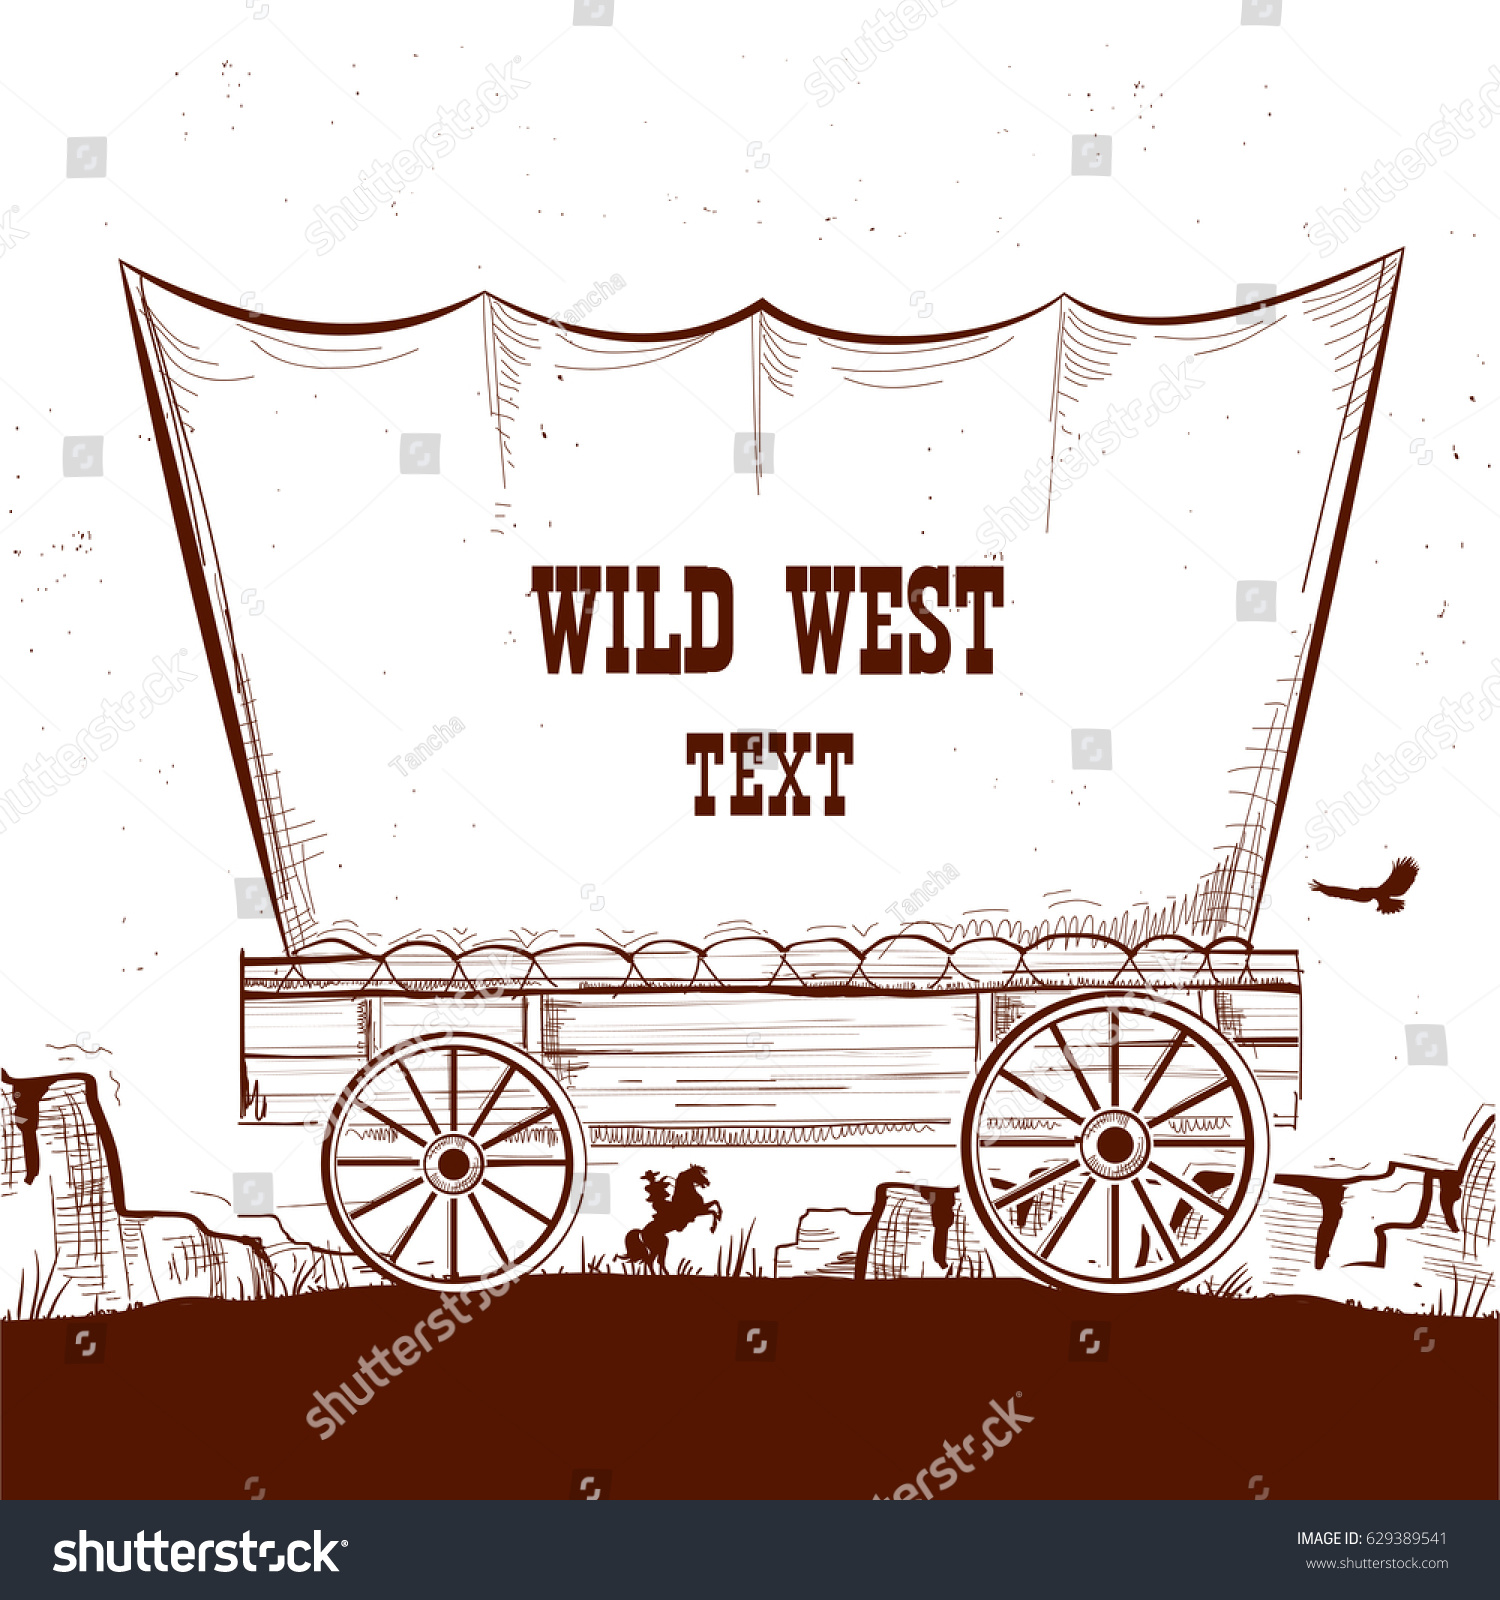 SVG of Wild west wagon with american prairies.Vector illustration background for text svg